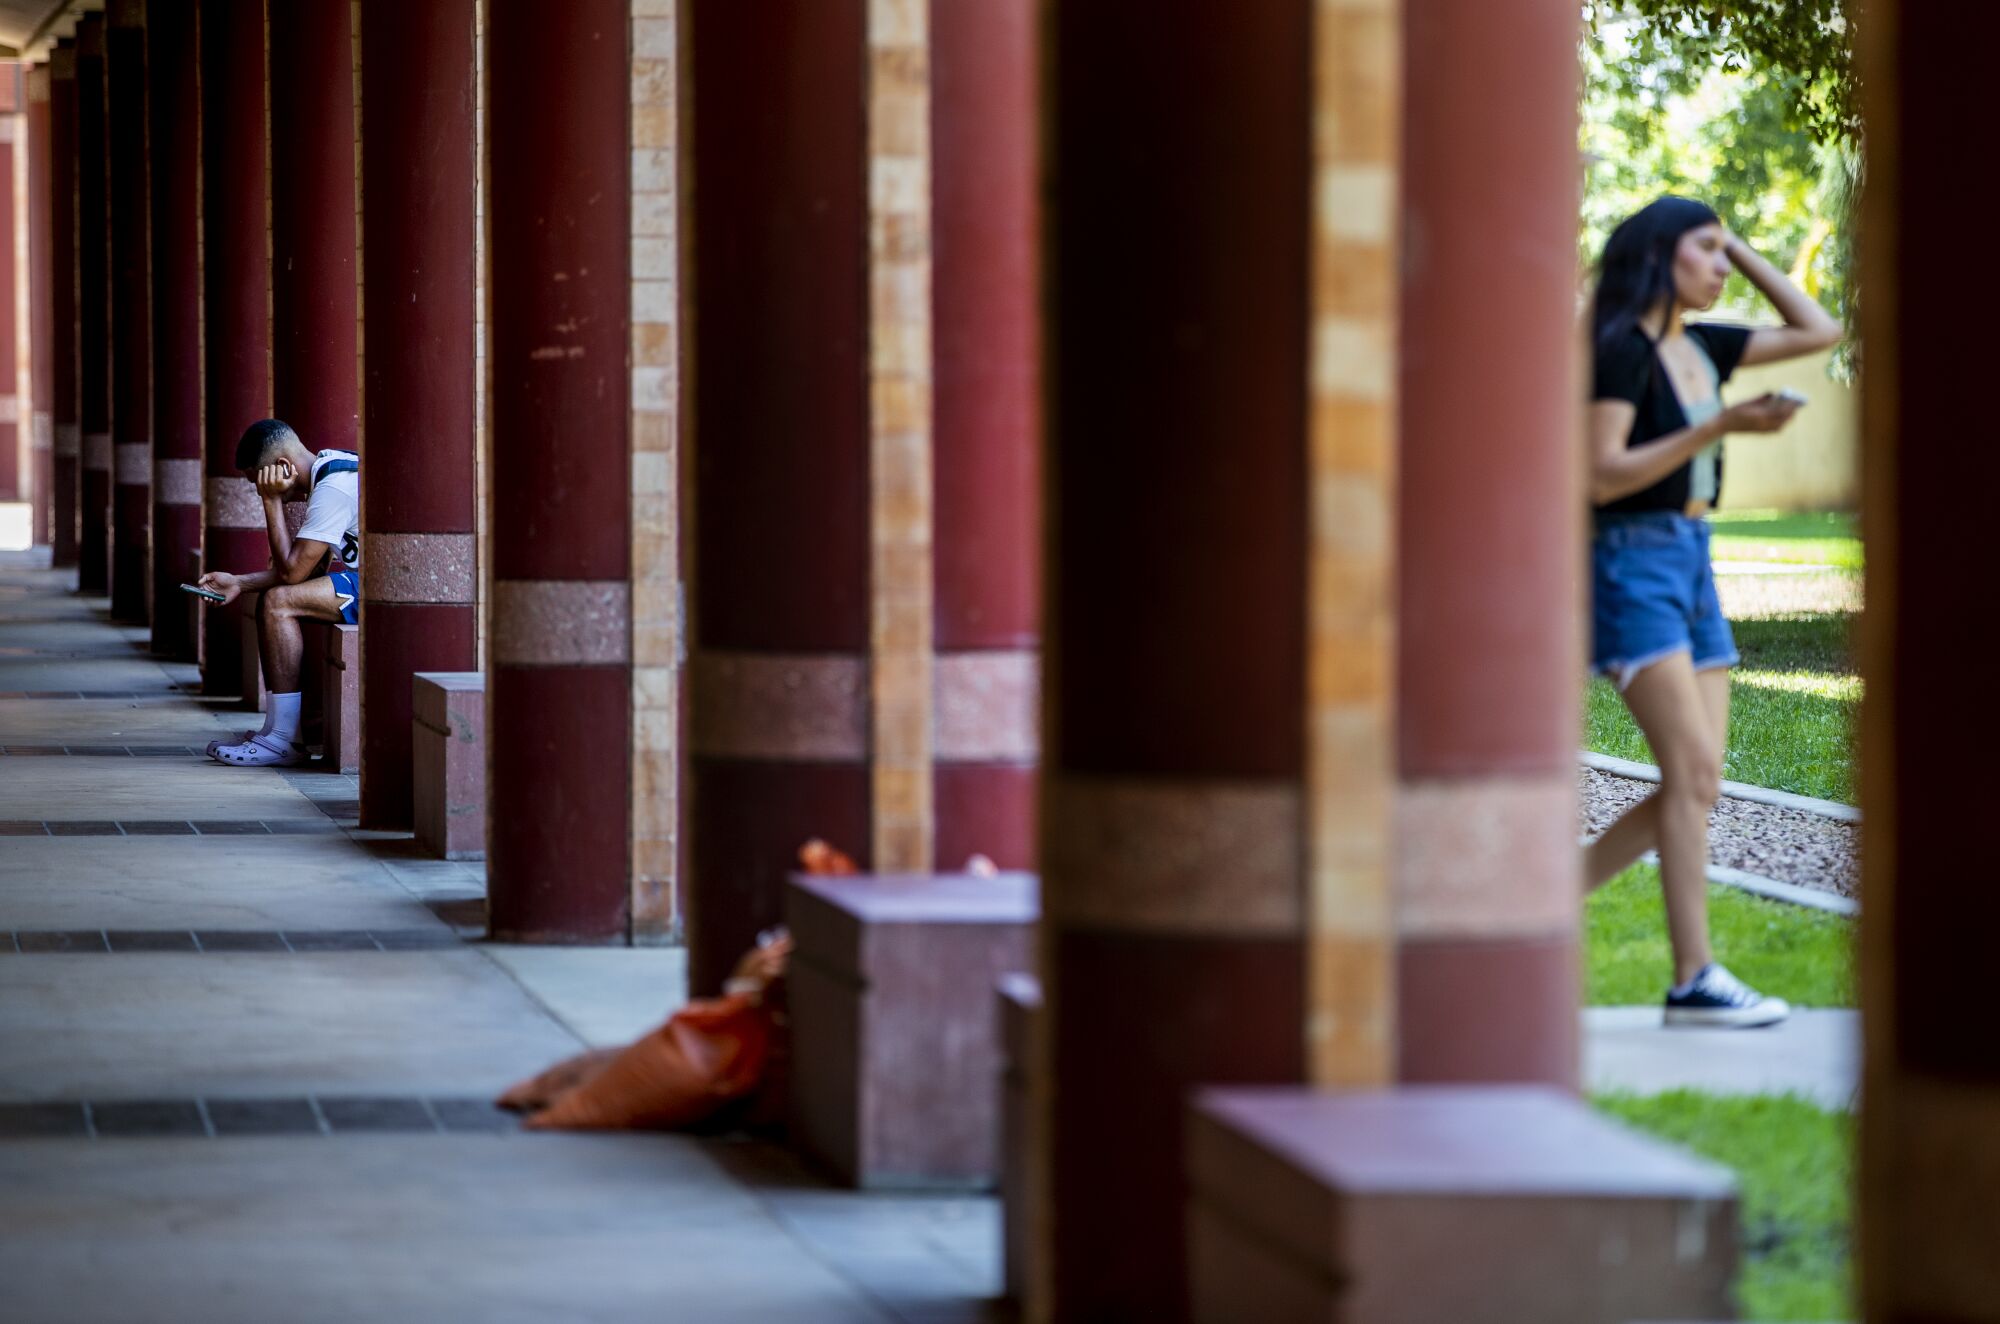 A UC Riverside student checks his phone at the Humanities building